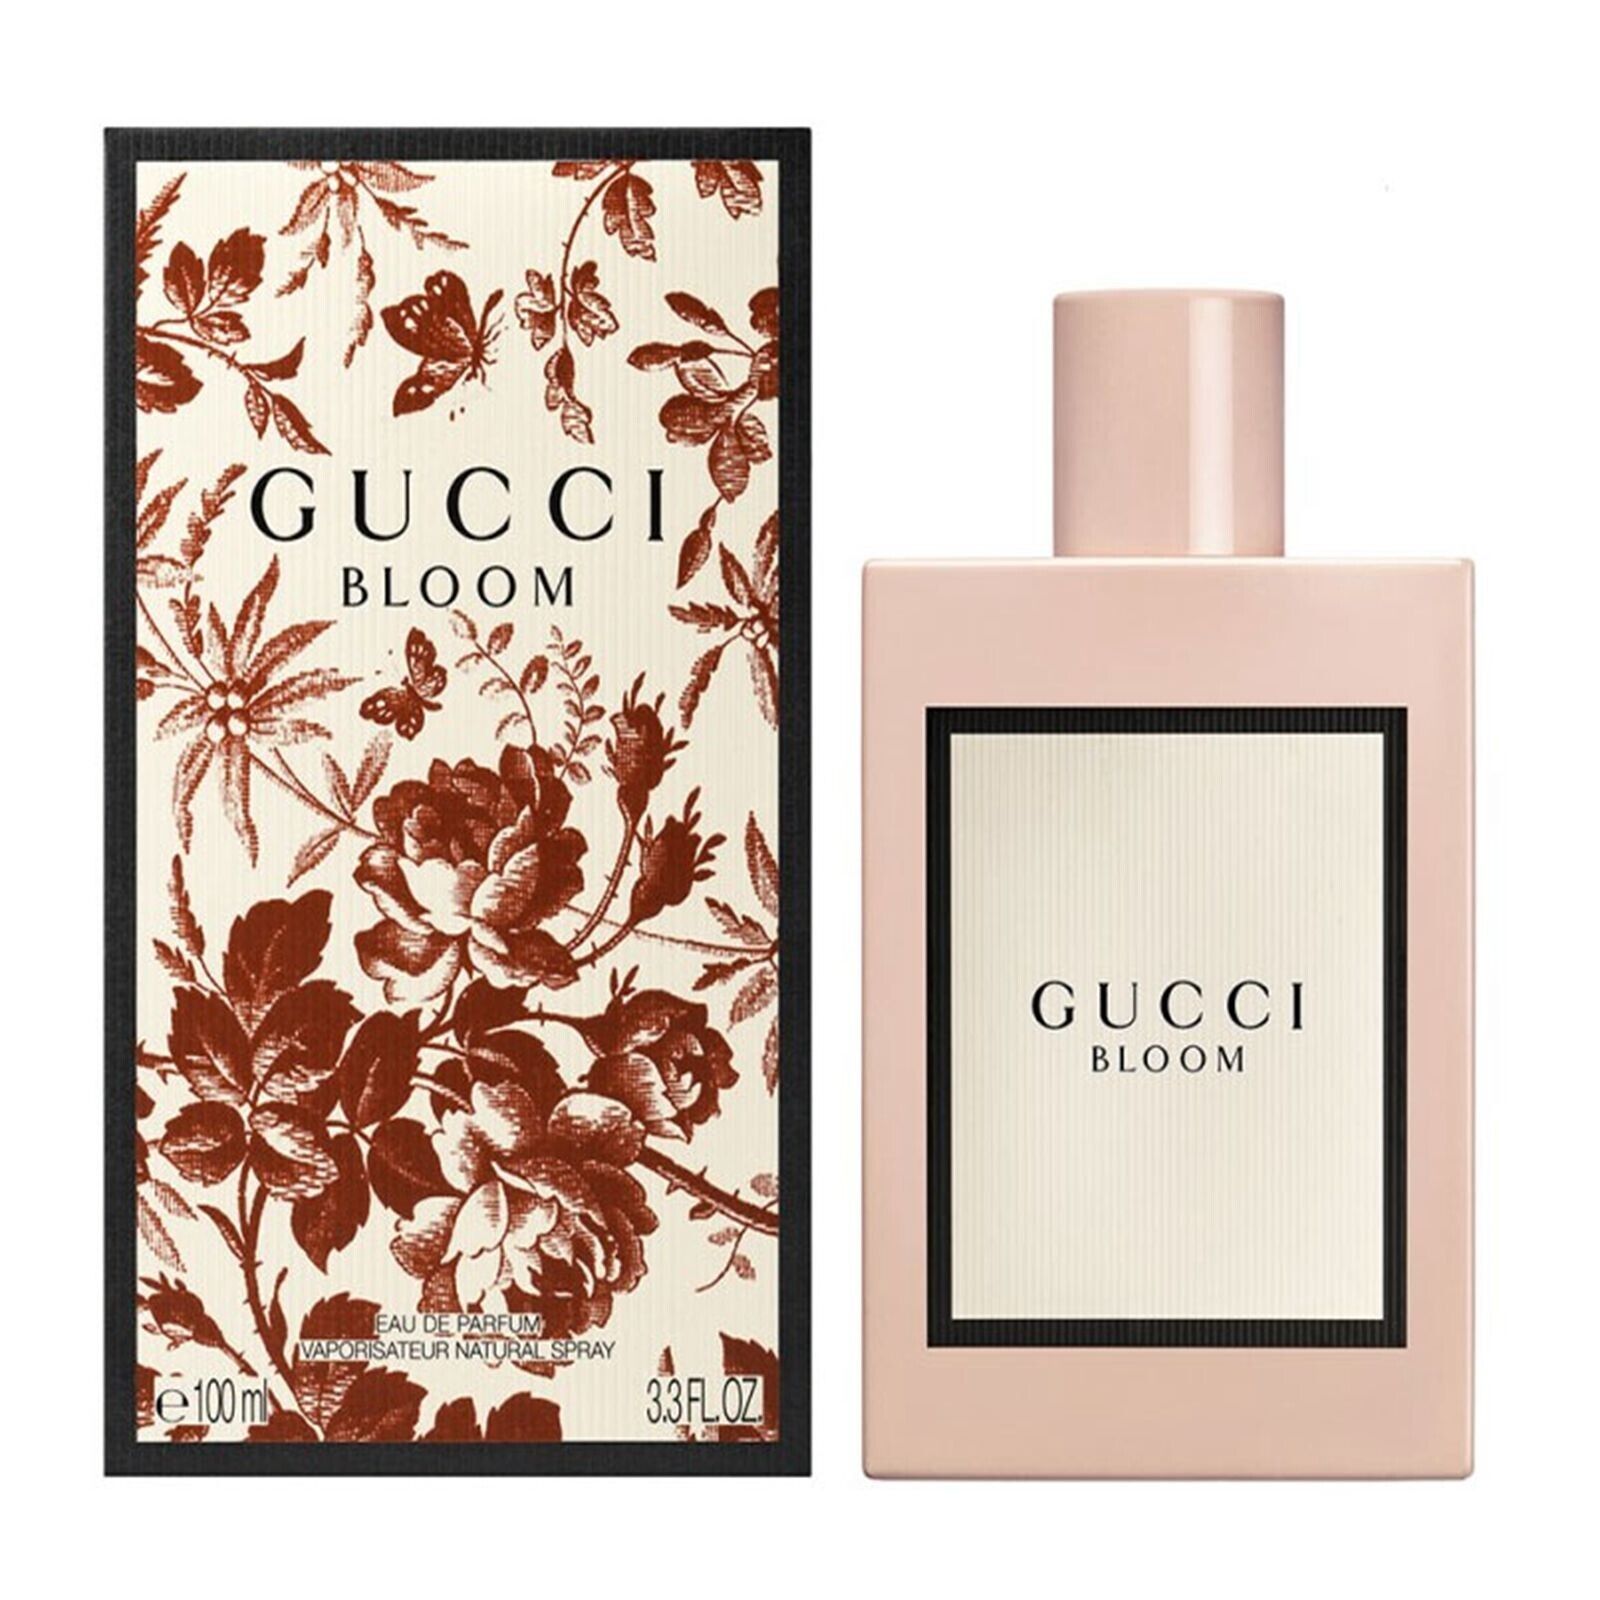 Bloom by Gucci3.3oz / 100 ml EDP Spray for Women Birthday Gift New In Sealed Box